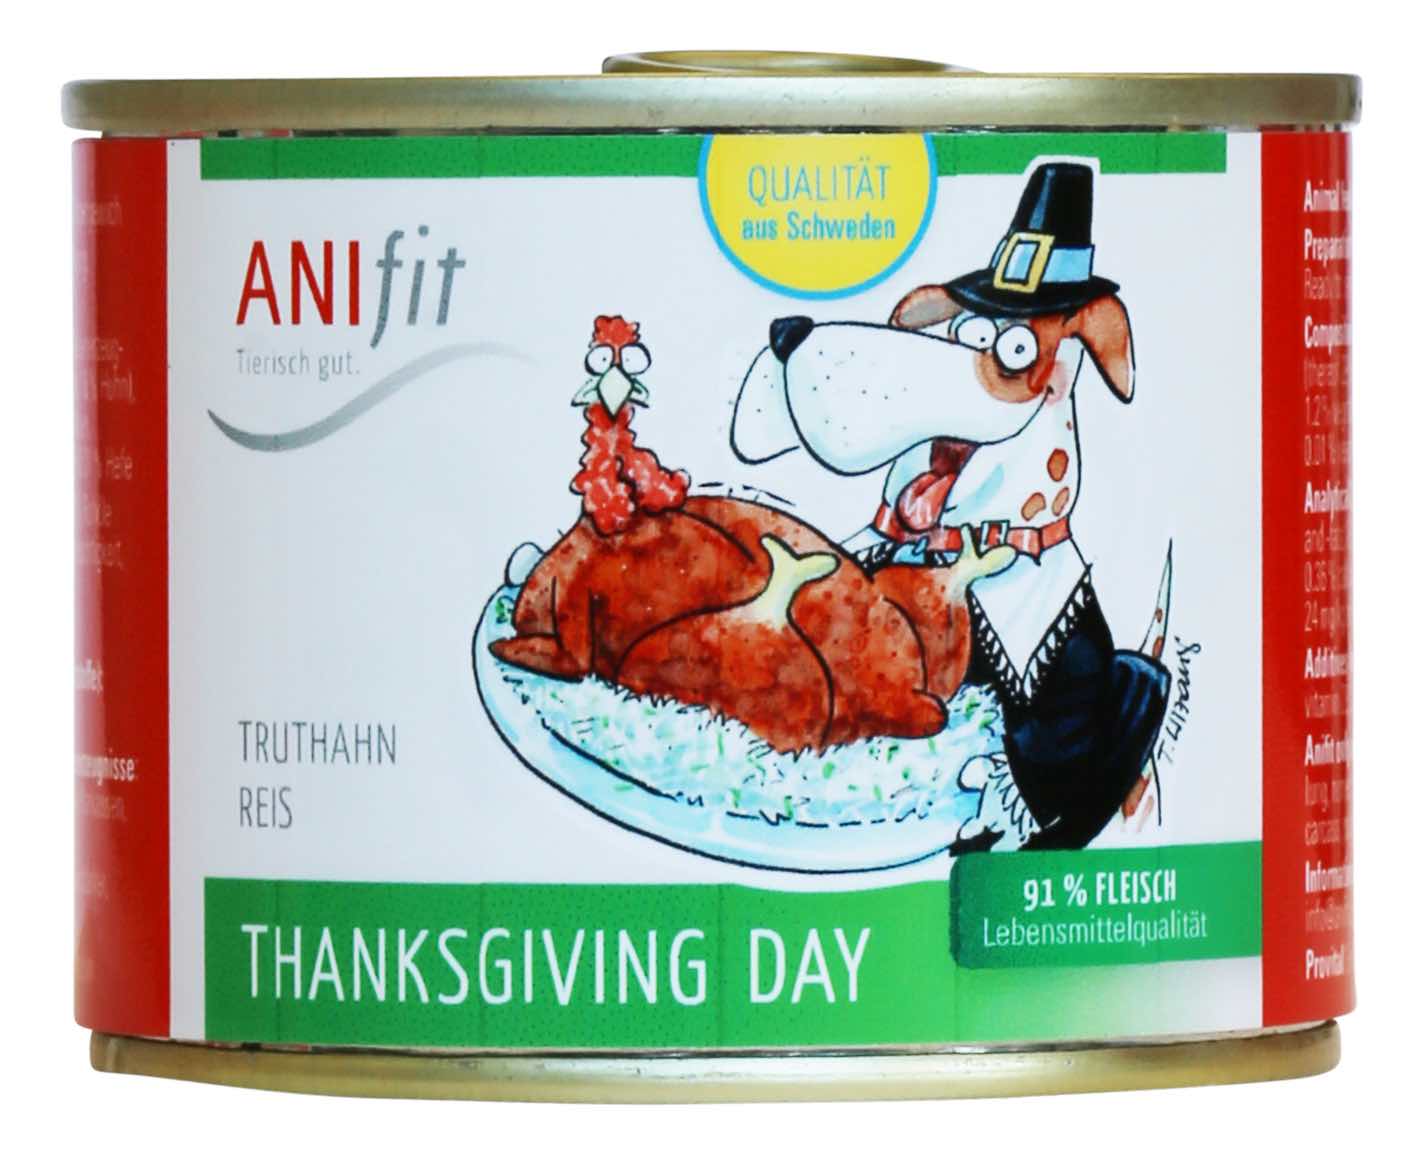 Anifit Hundefutter kaufen Thanksgiving Day